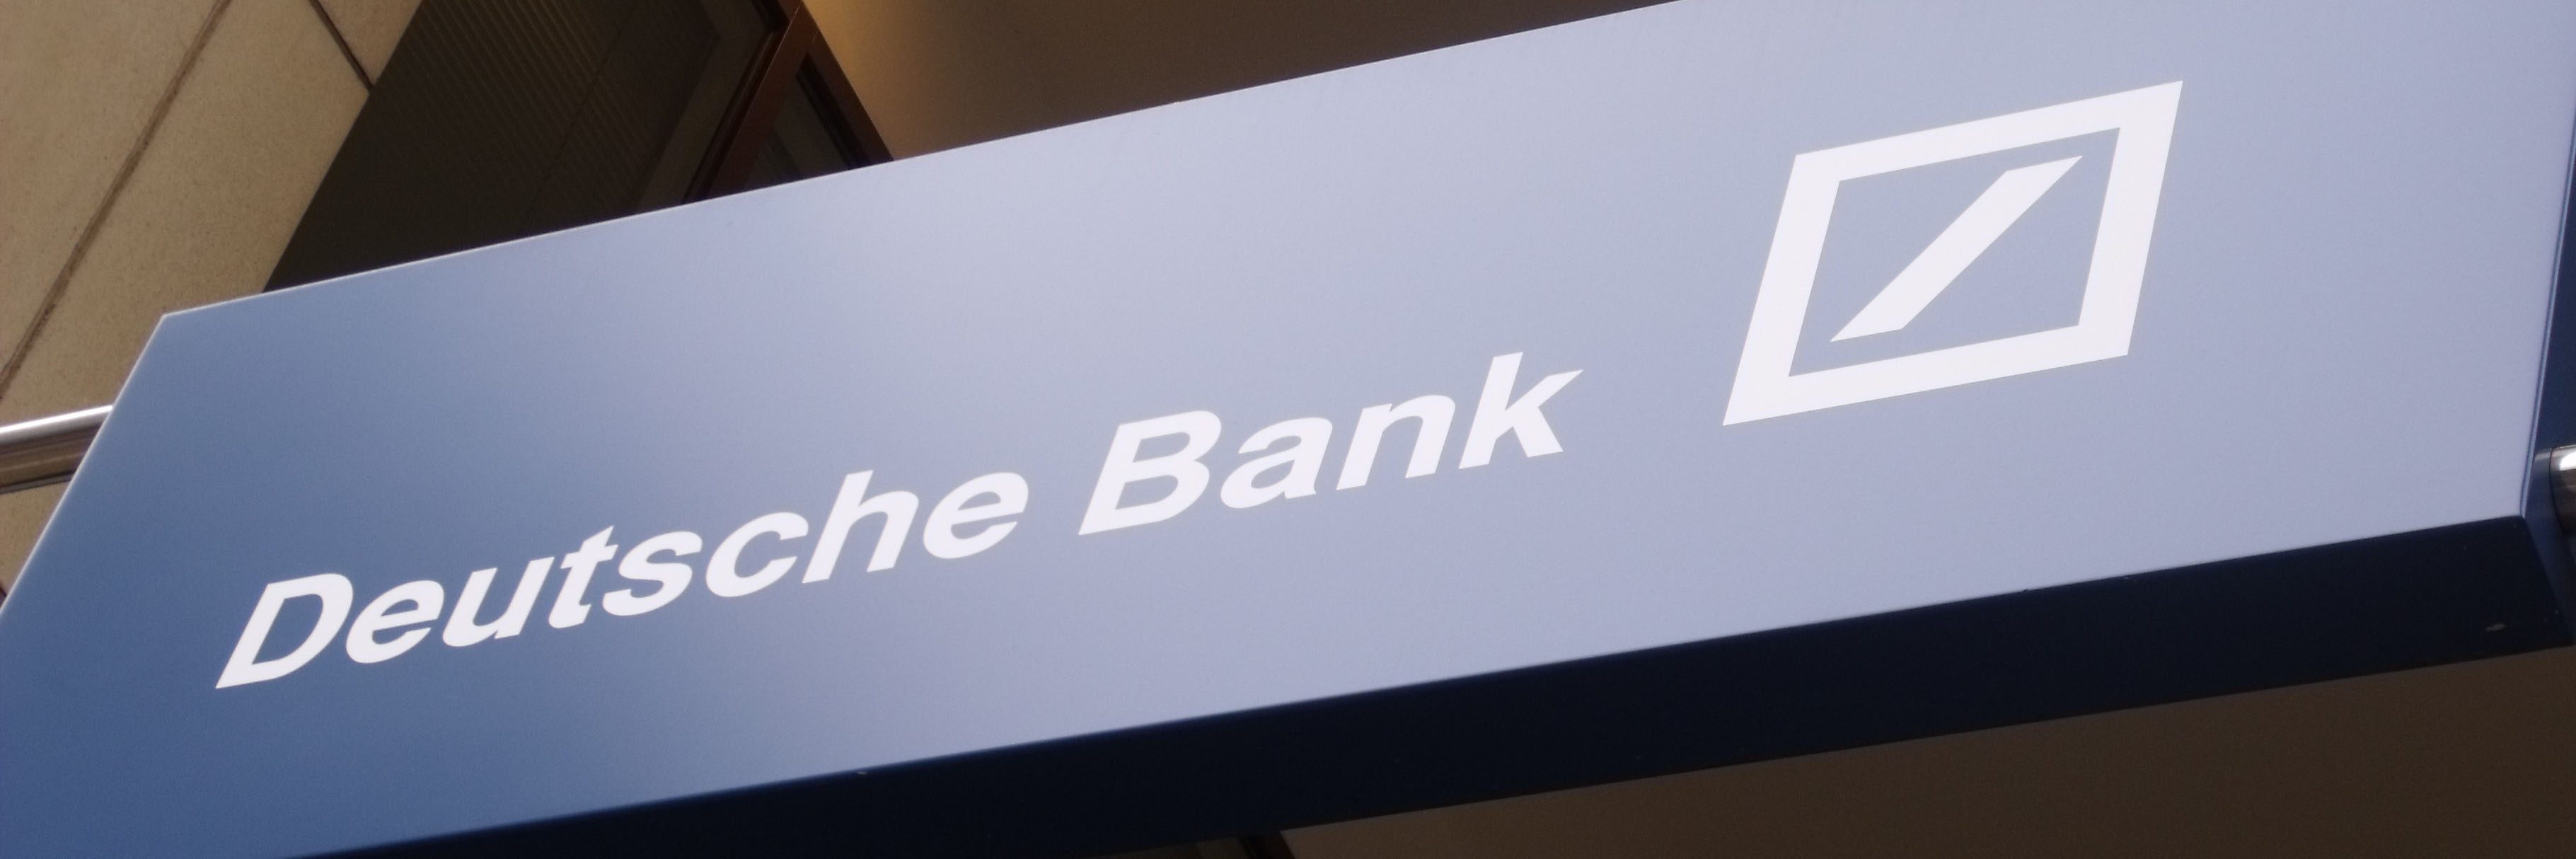 Deutsche Bank ranks first in social media buzz – that’s a good thing, right?